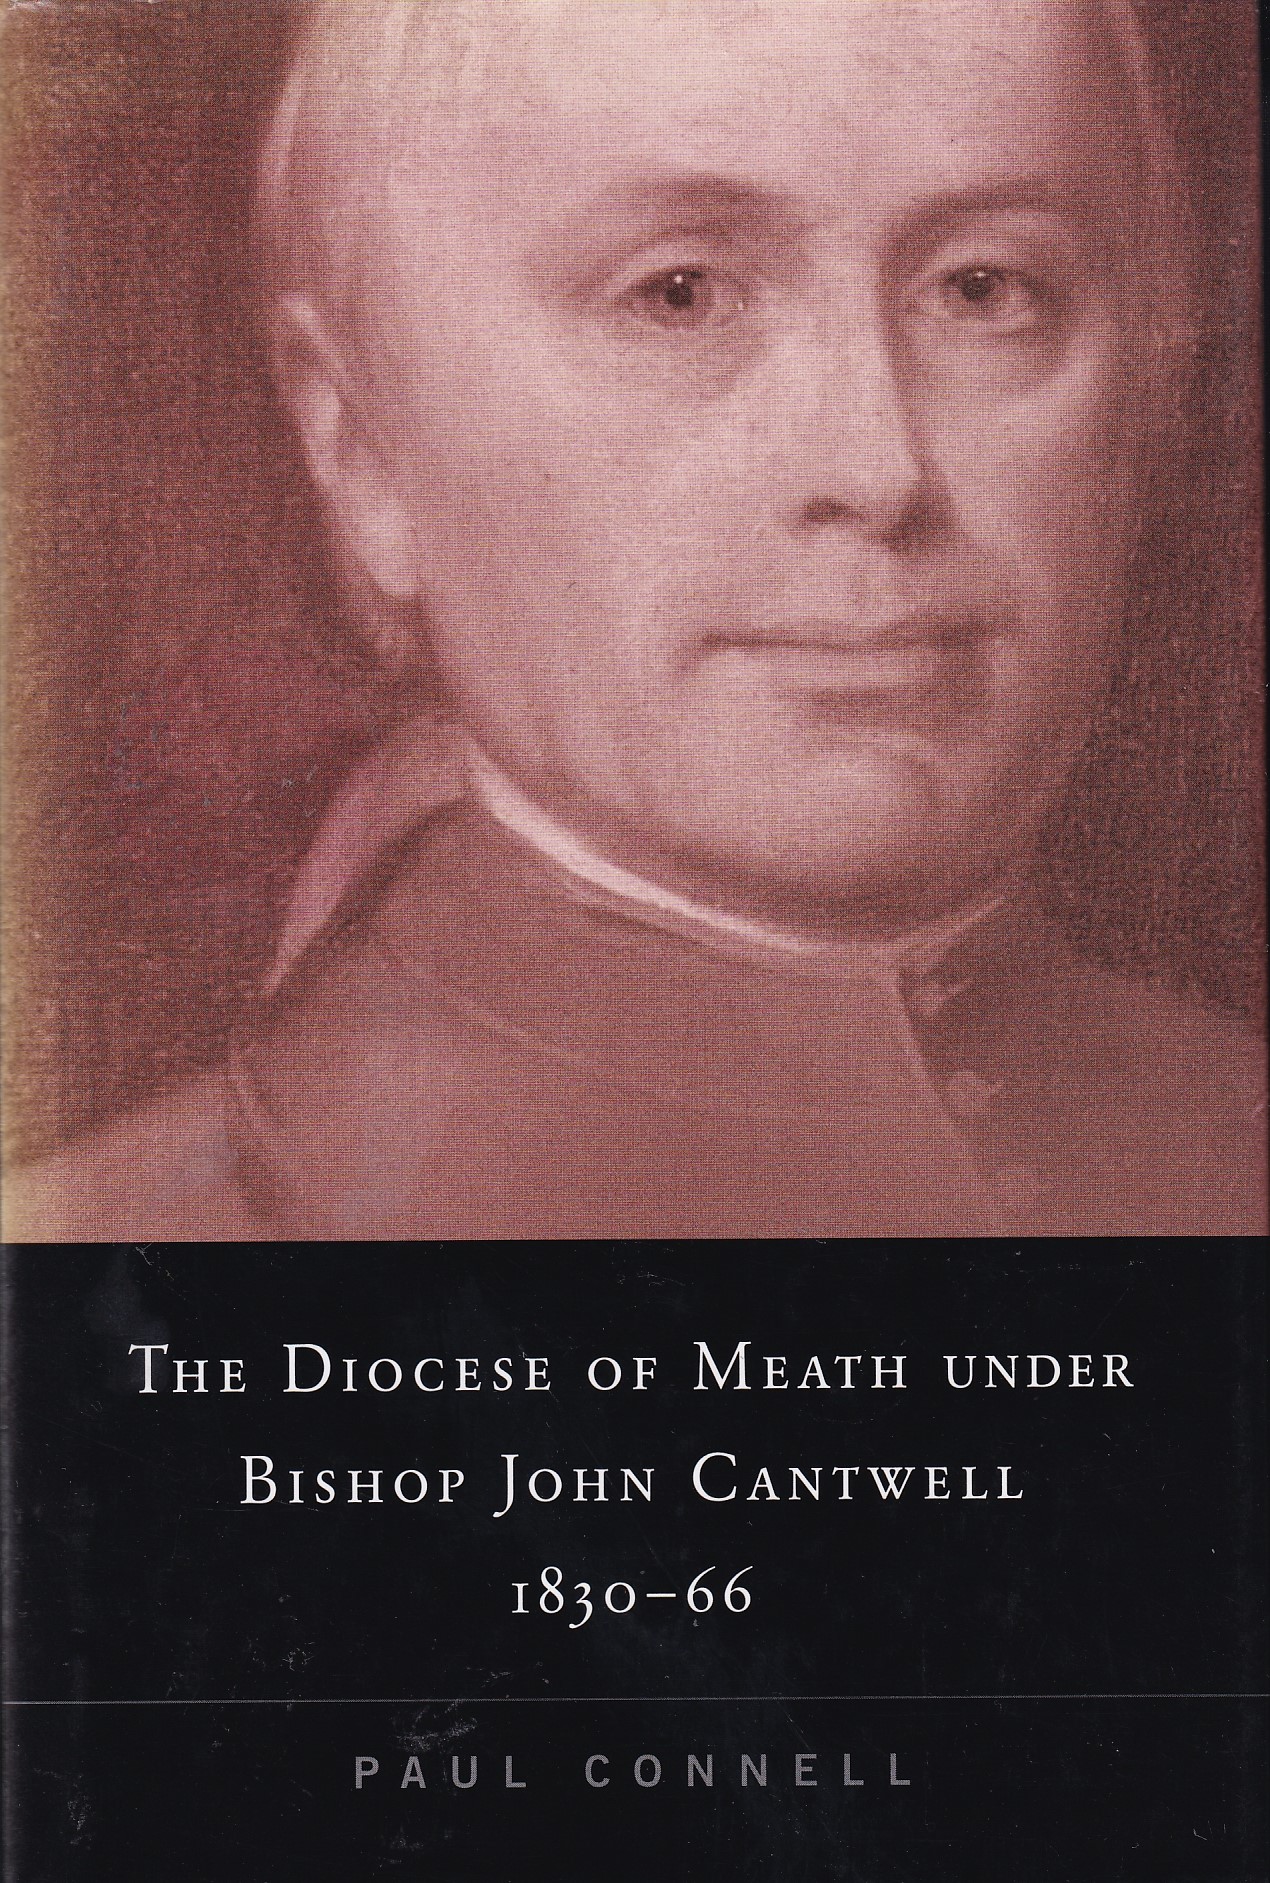 The Diocese of Meath under Bishop John Cantwell, 1830-66 by Paull Connell